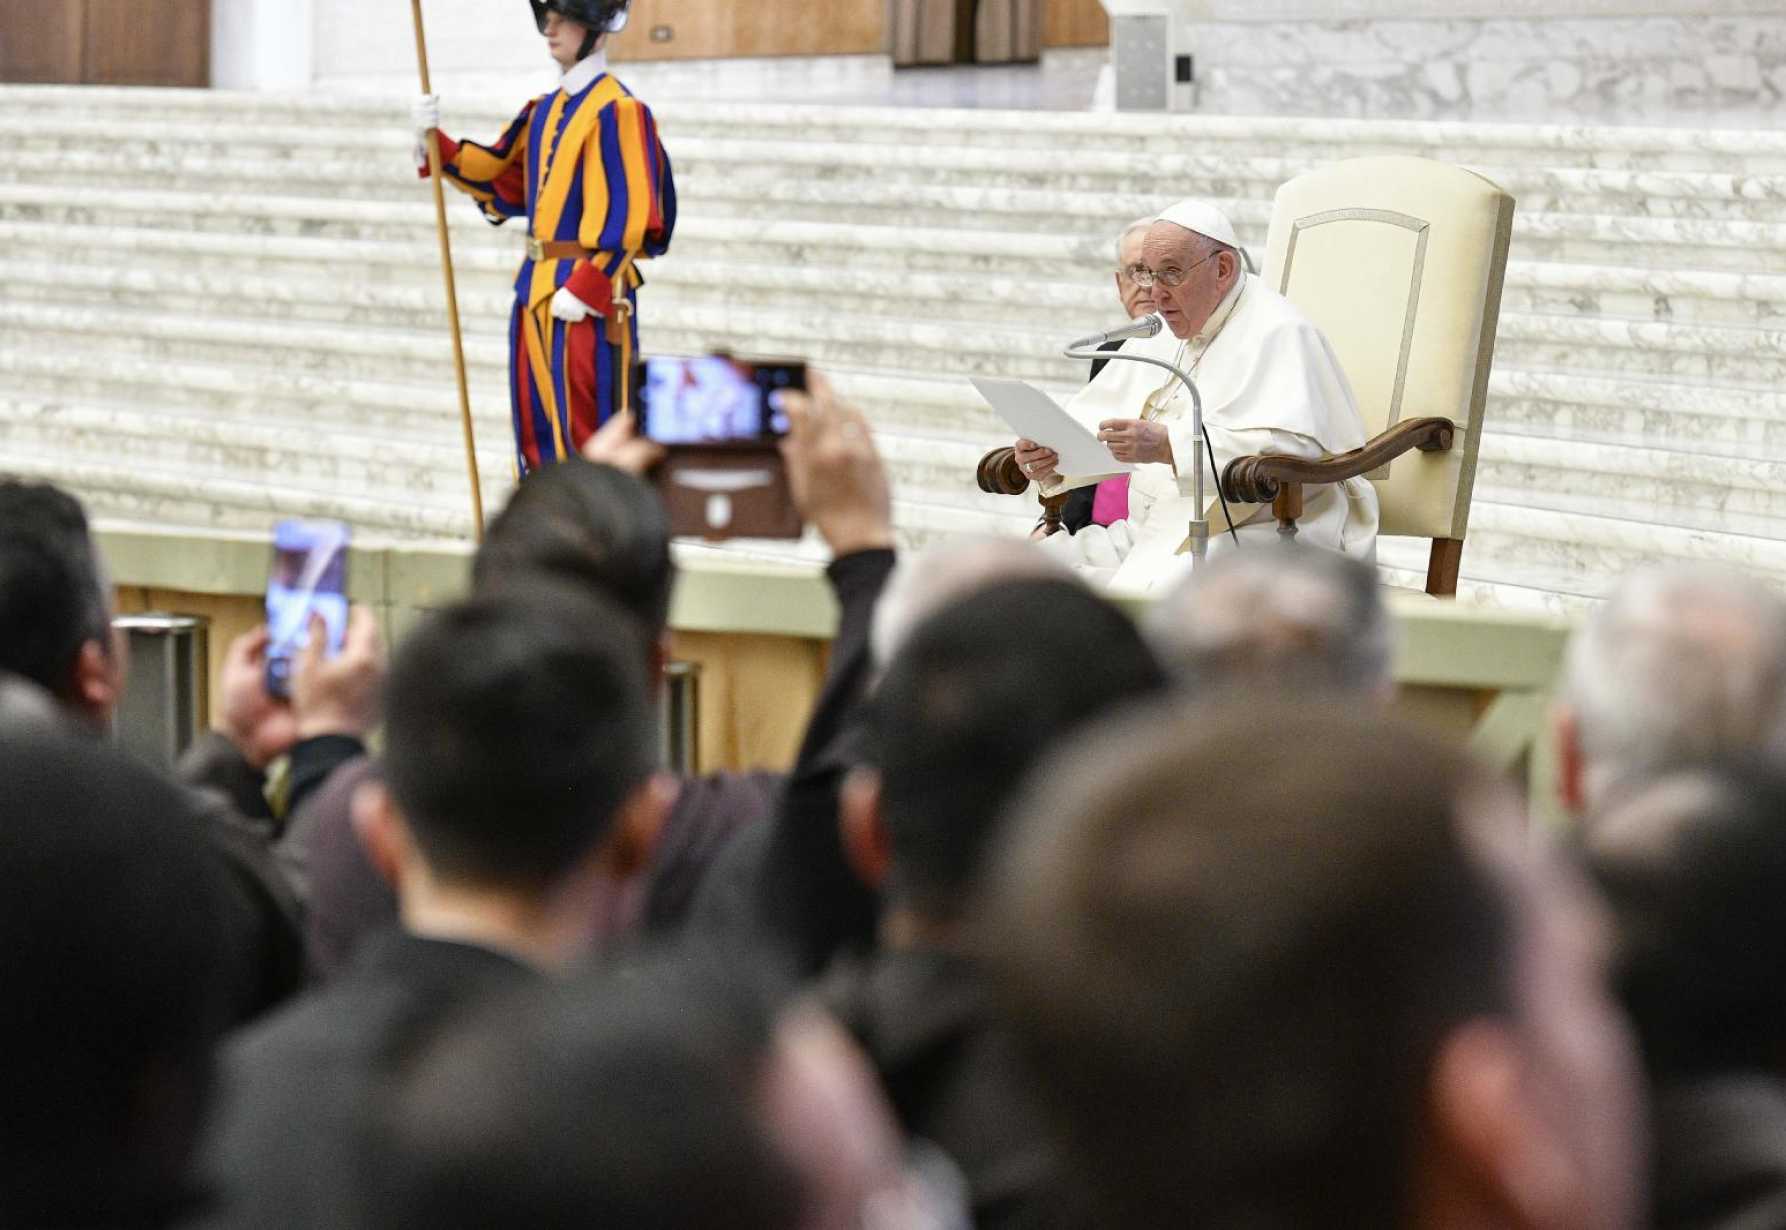 Confession is 'encounter of love' that fights evil, pope tells priests